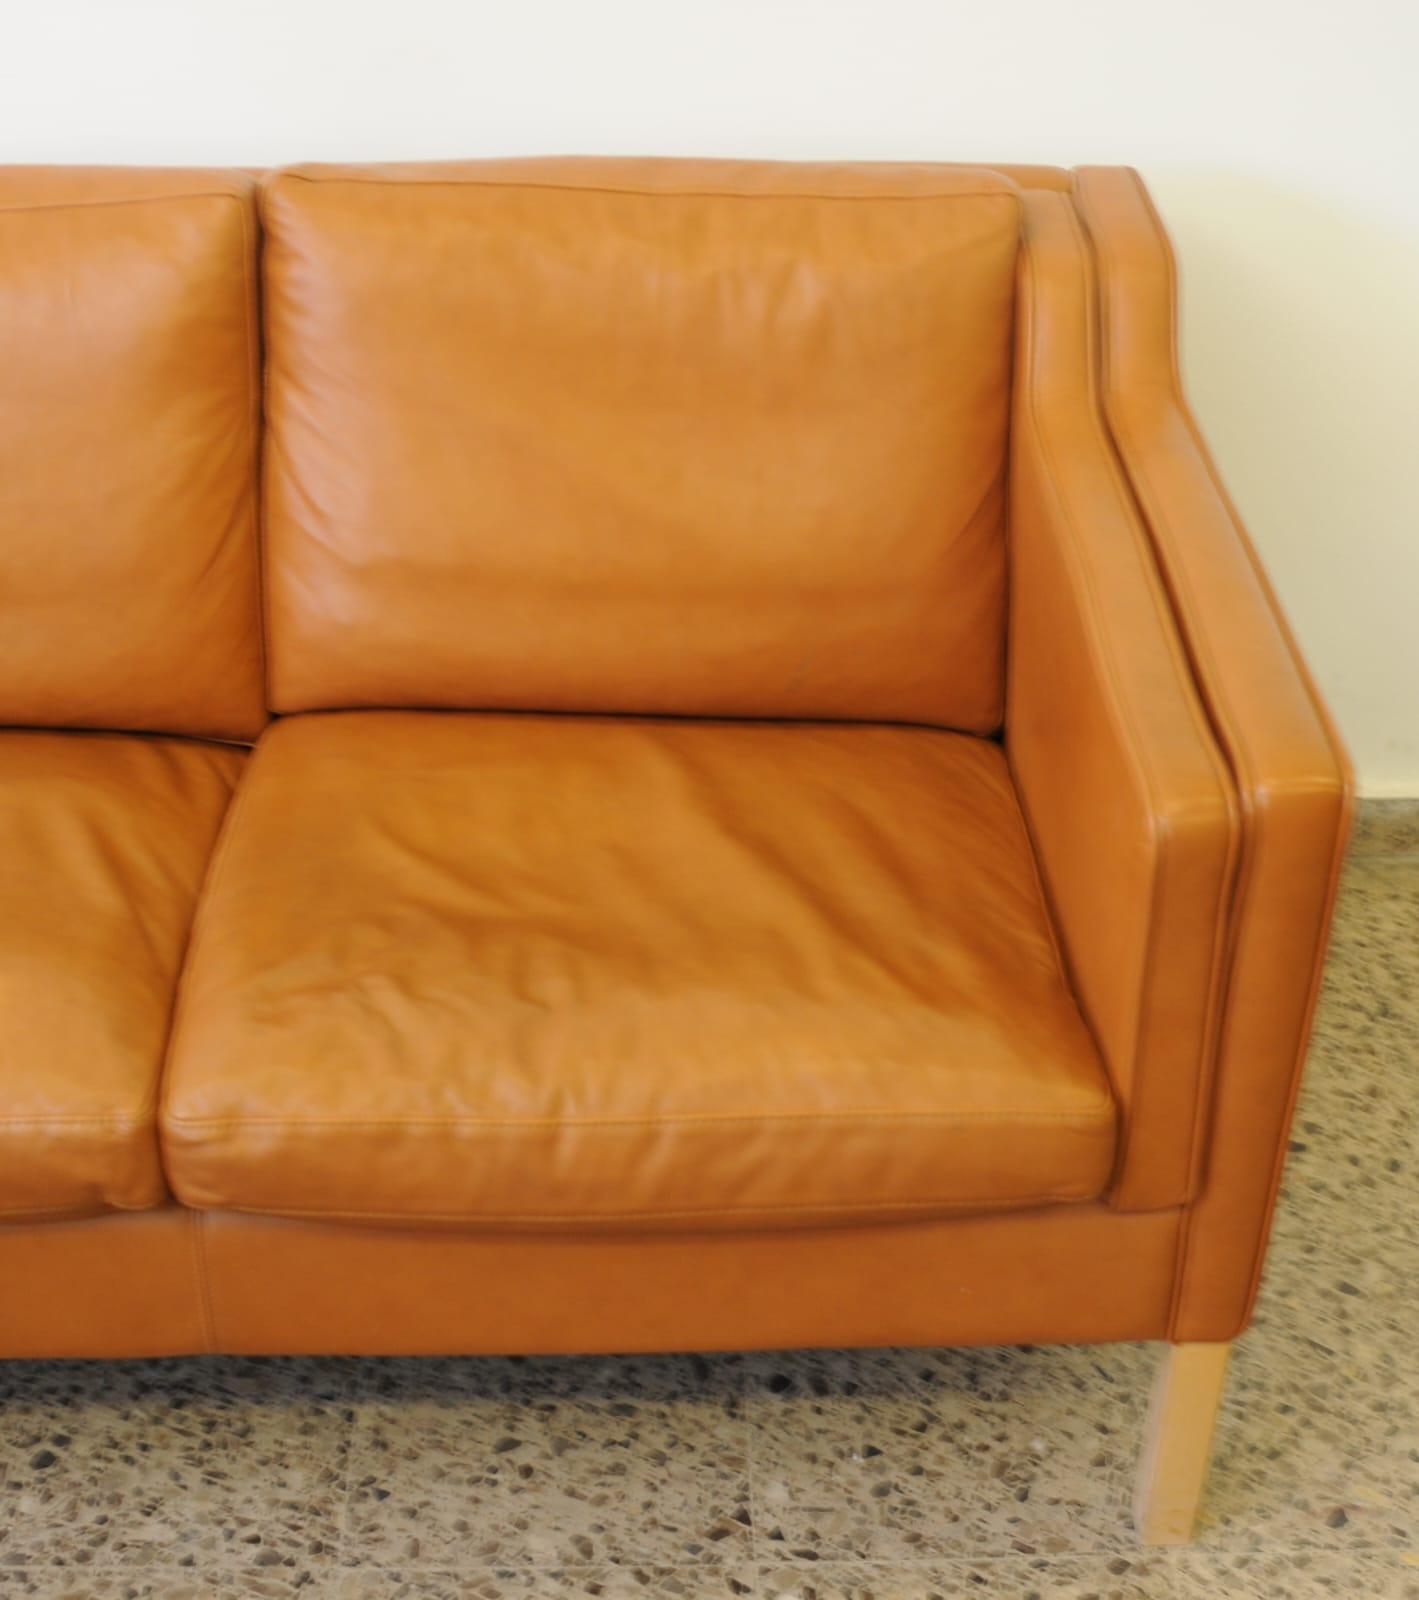 20th Century Eva Danish Cognac Leather Sofa by Stouby For Sale